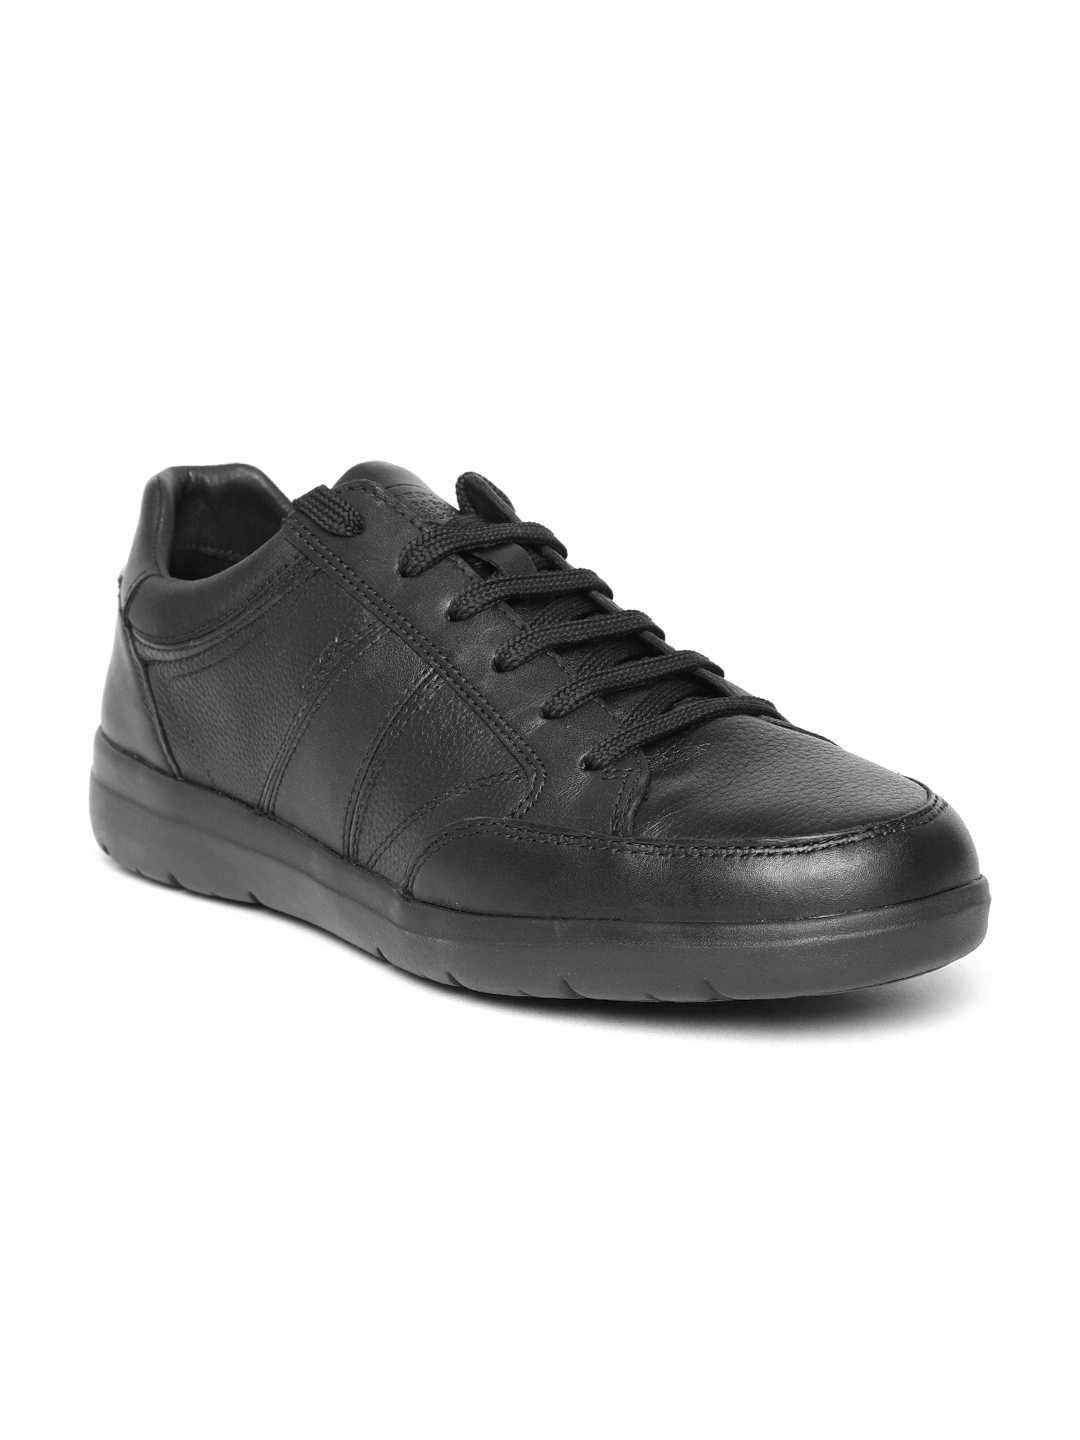 Buy Geox Men Black Solid Leather Sneakers - Casual Shoes for Men ...